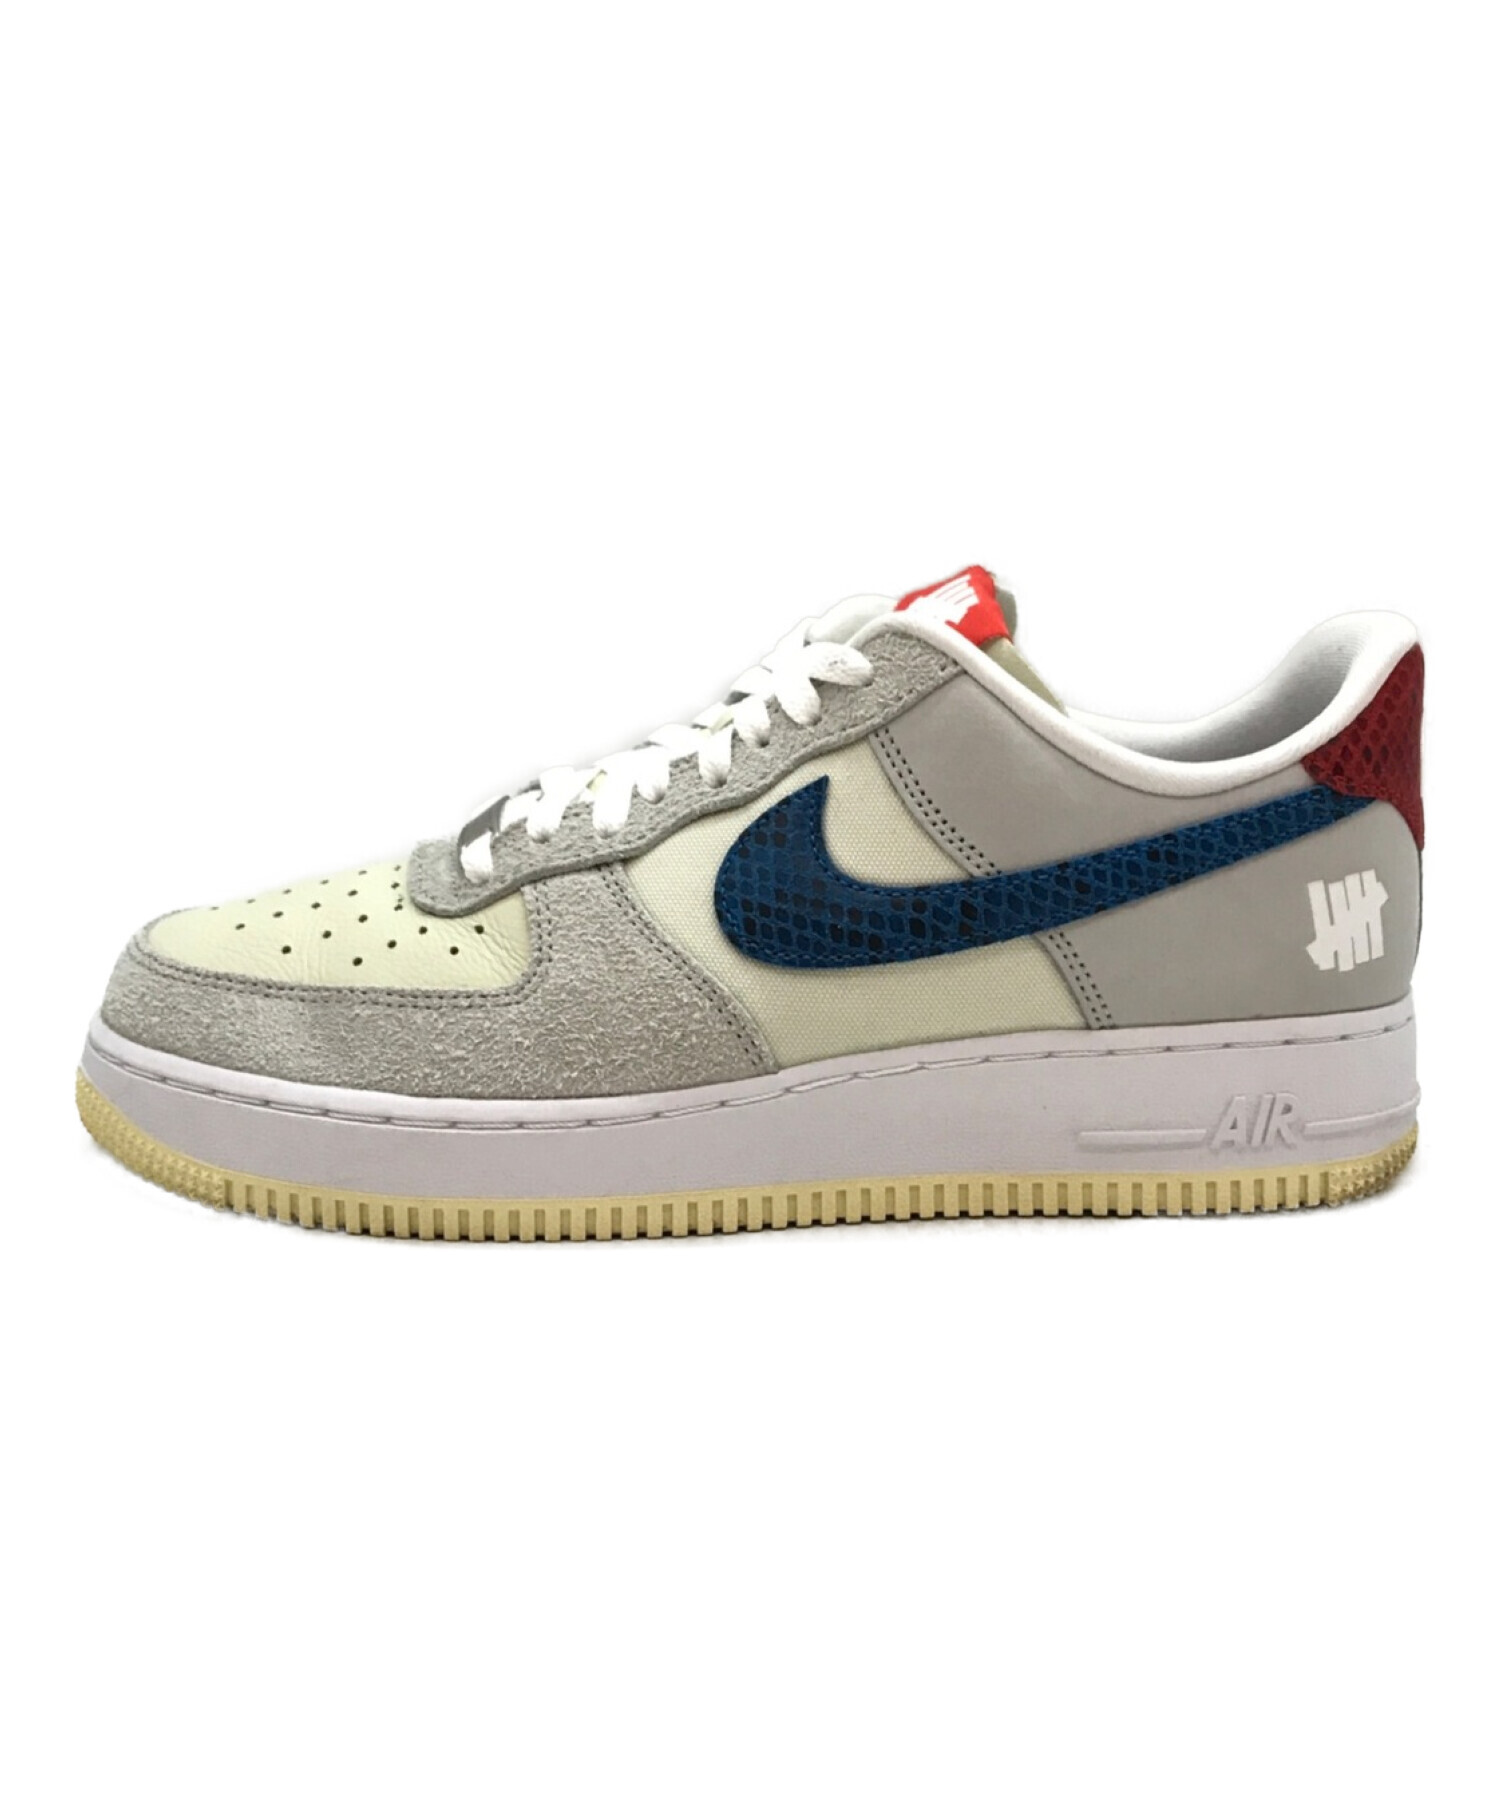 AIR FORCE 1 LOW SP UNDEFEATED 26.5 新品